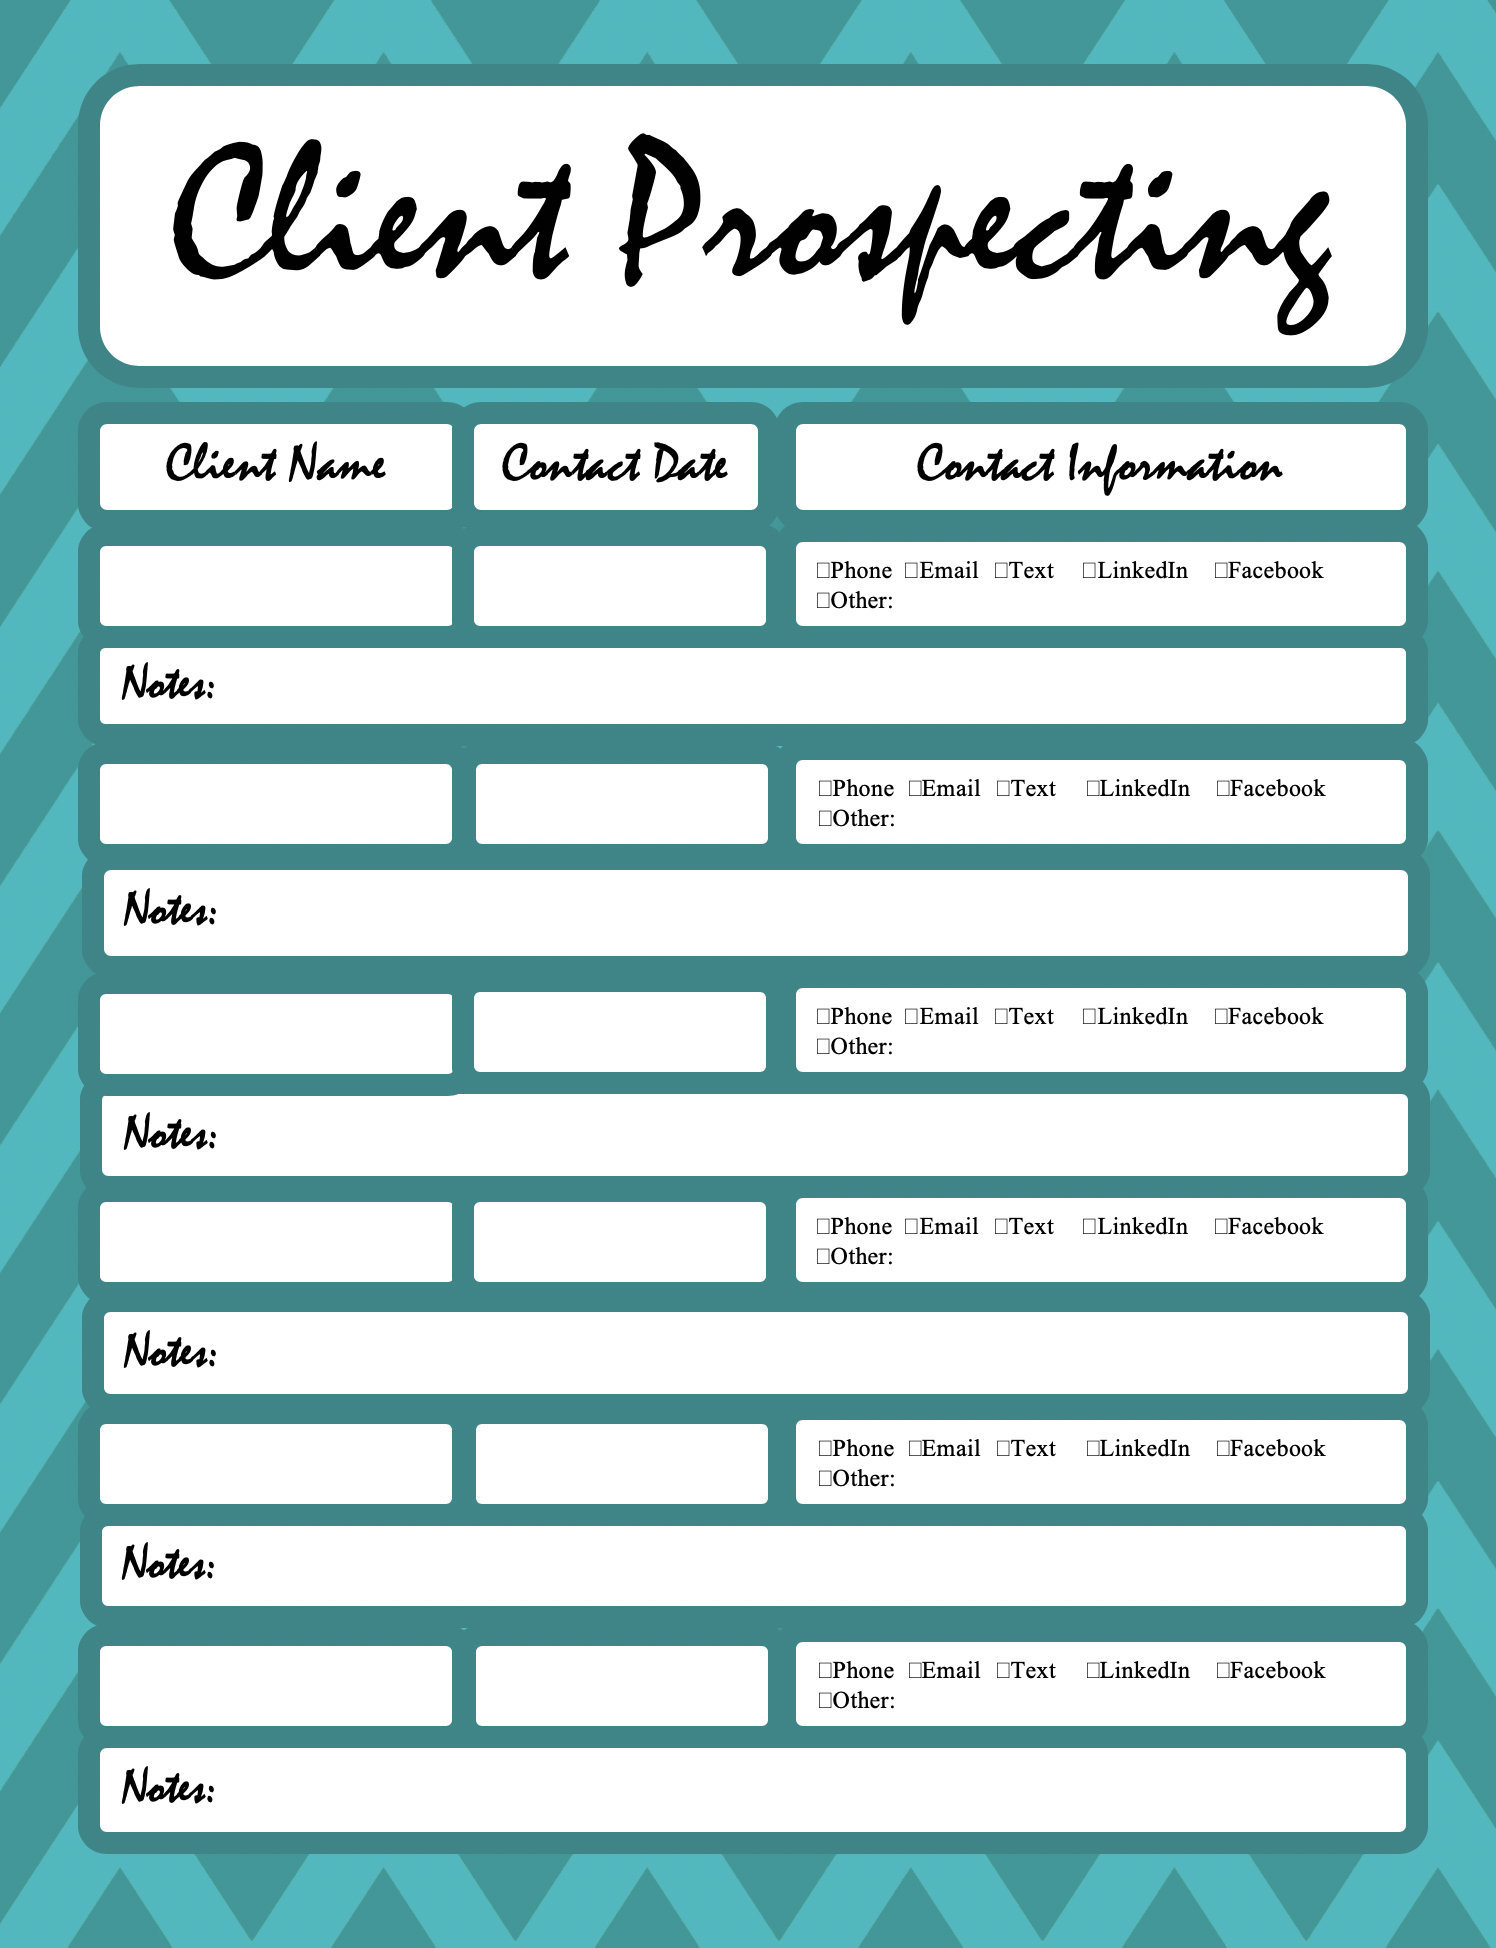 client-prospecting-sheet-teal-etsy